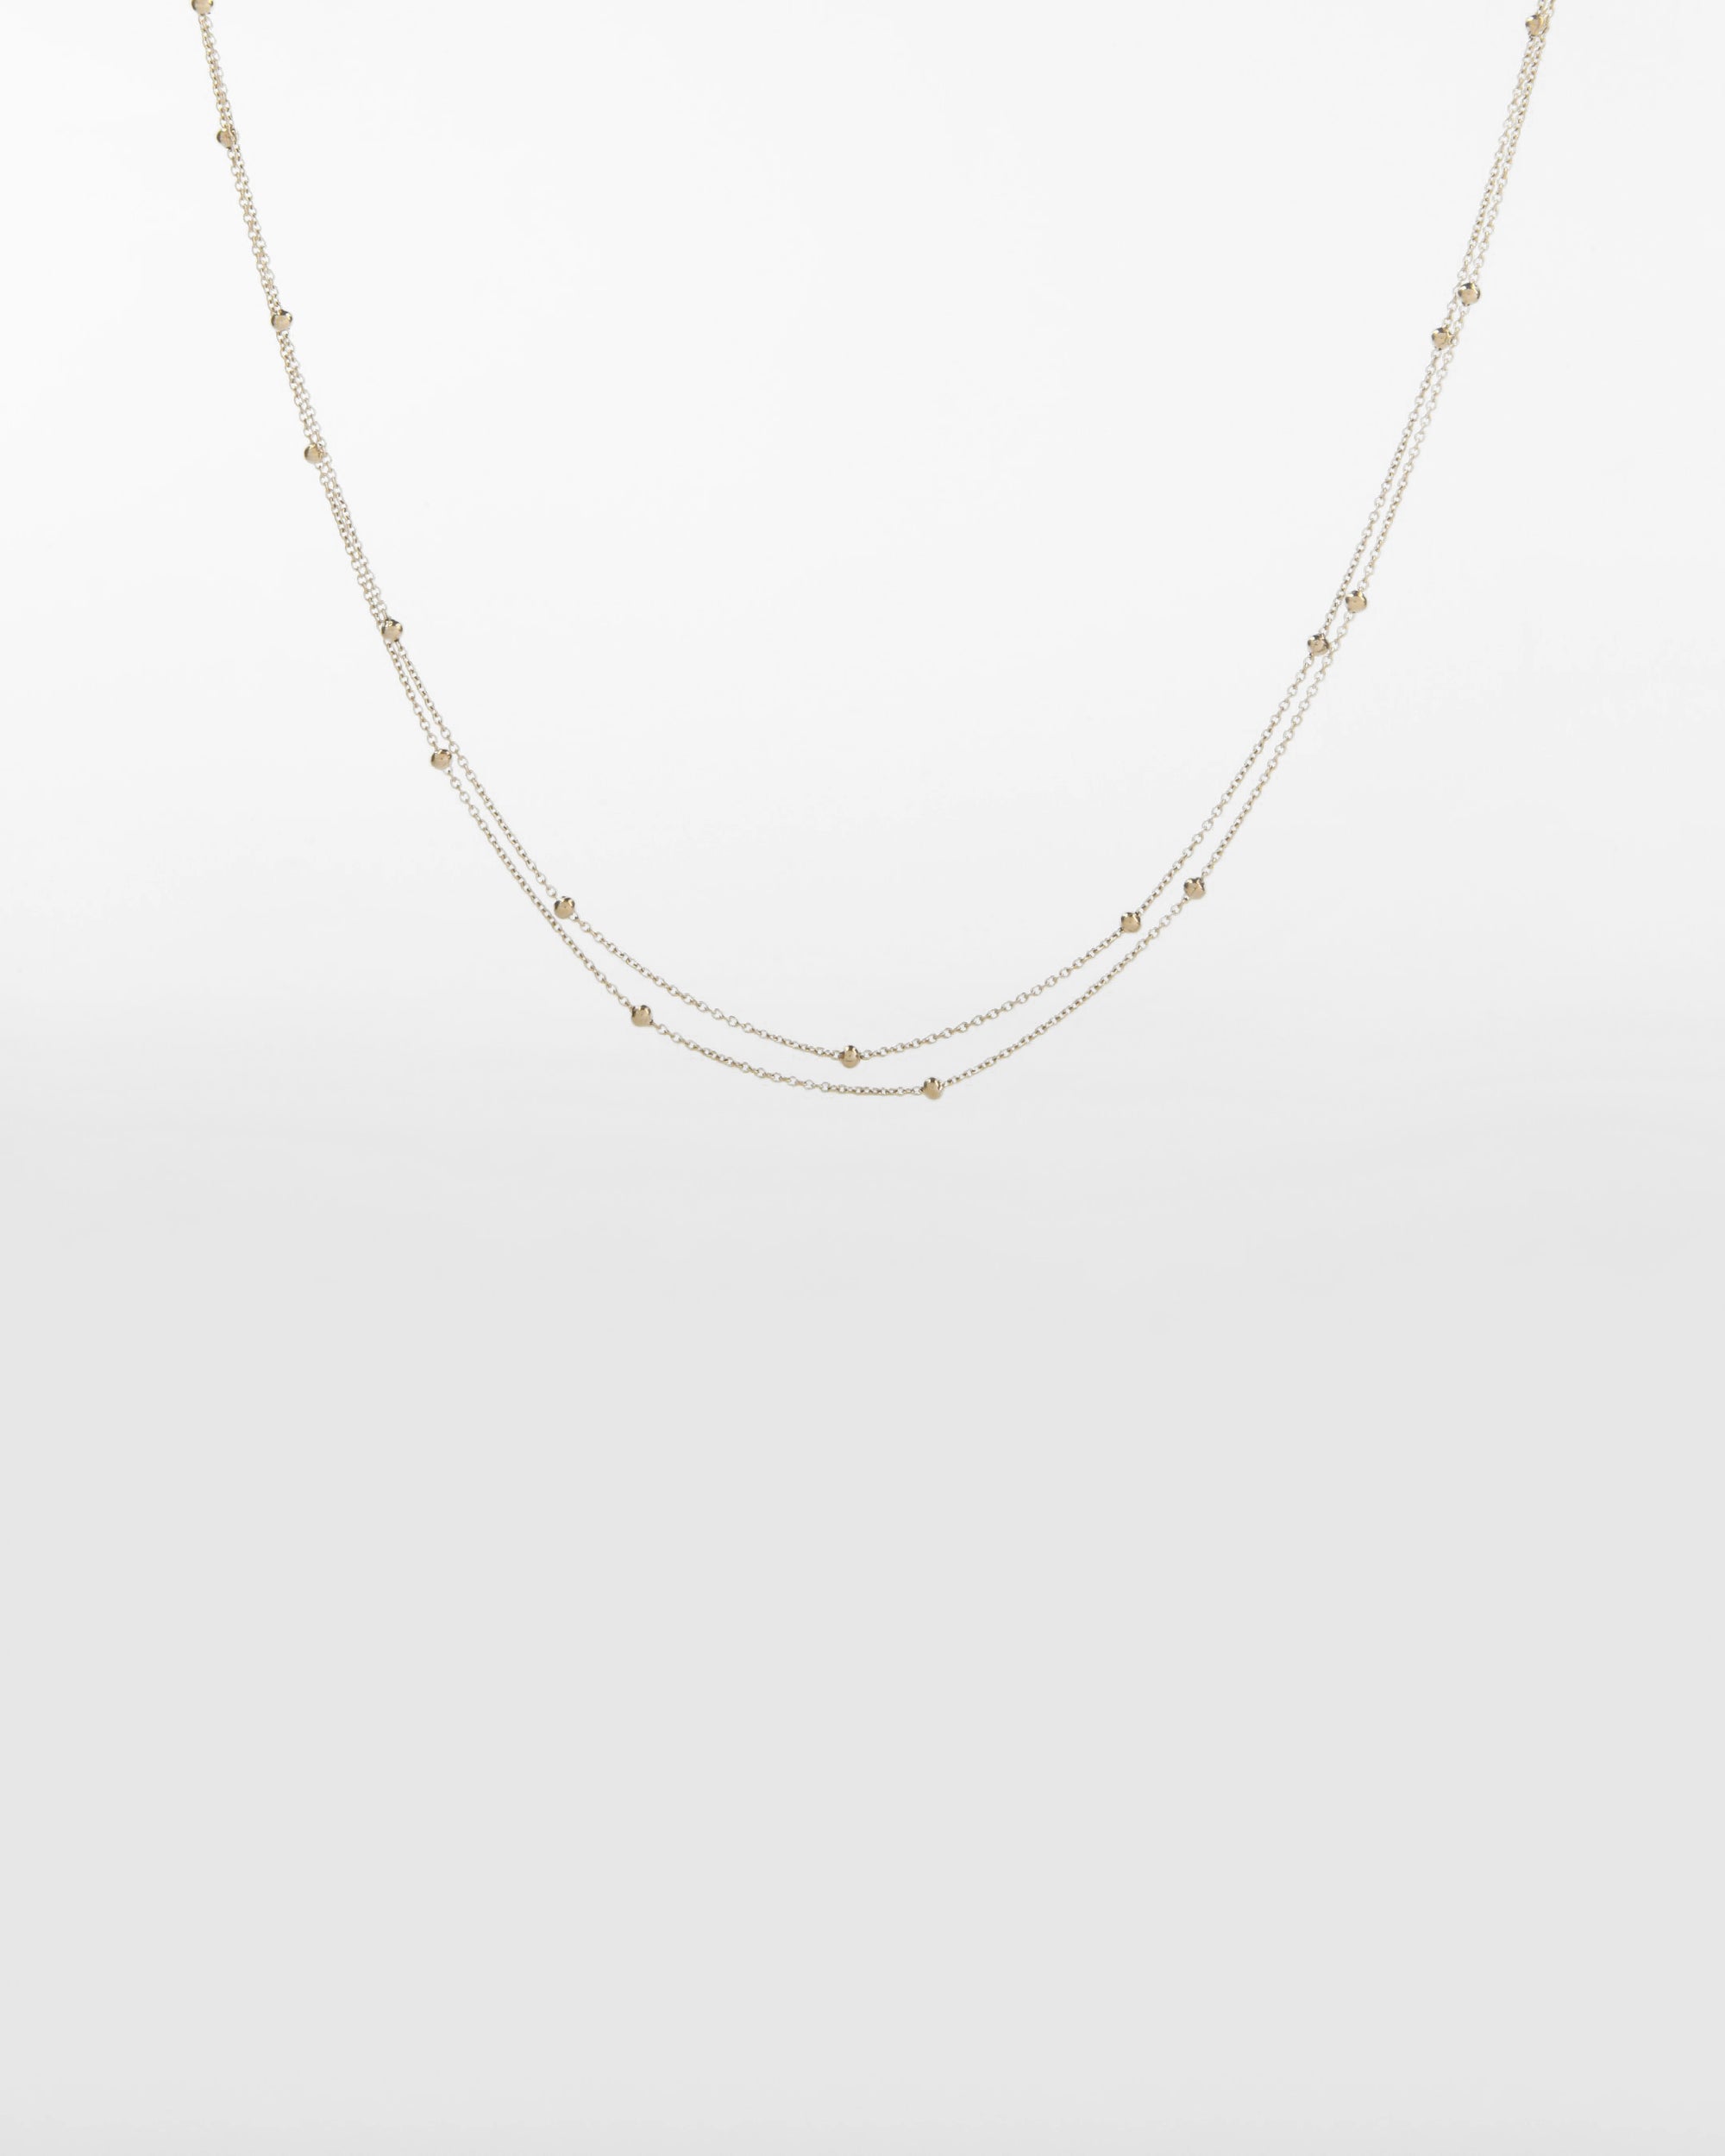 A minimalist, double-layered 18kt gold-plated necklace with small, evenly spaced beads along the chains. The background is plain and light, highlighting the delicate design and multi-strand elegance of this piece—Beetle Glasses Chain by For Art's Sake®.